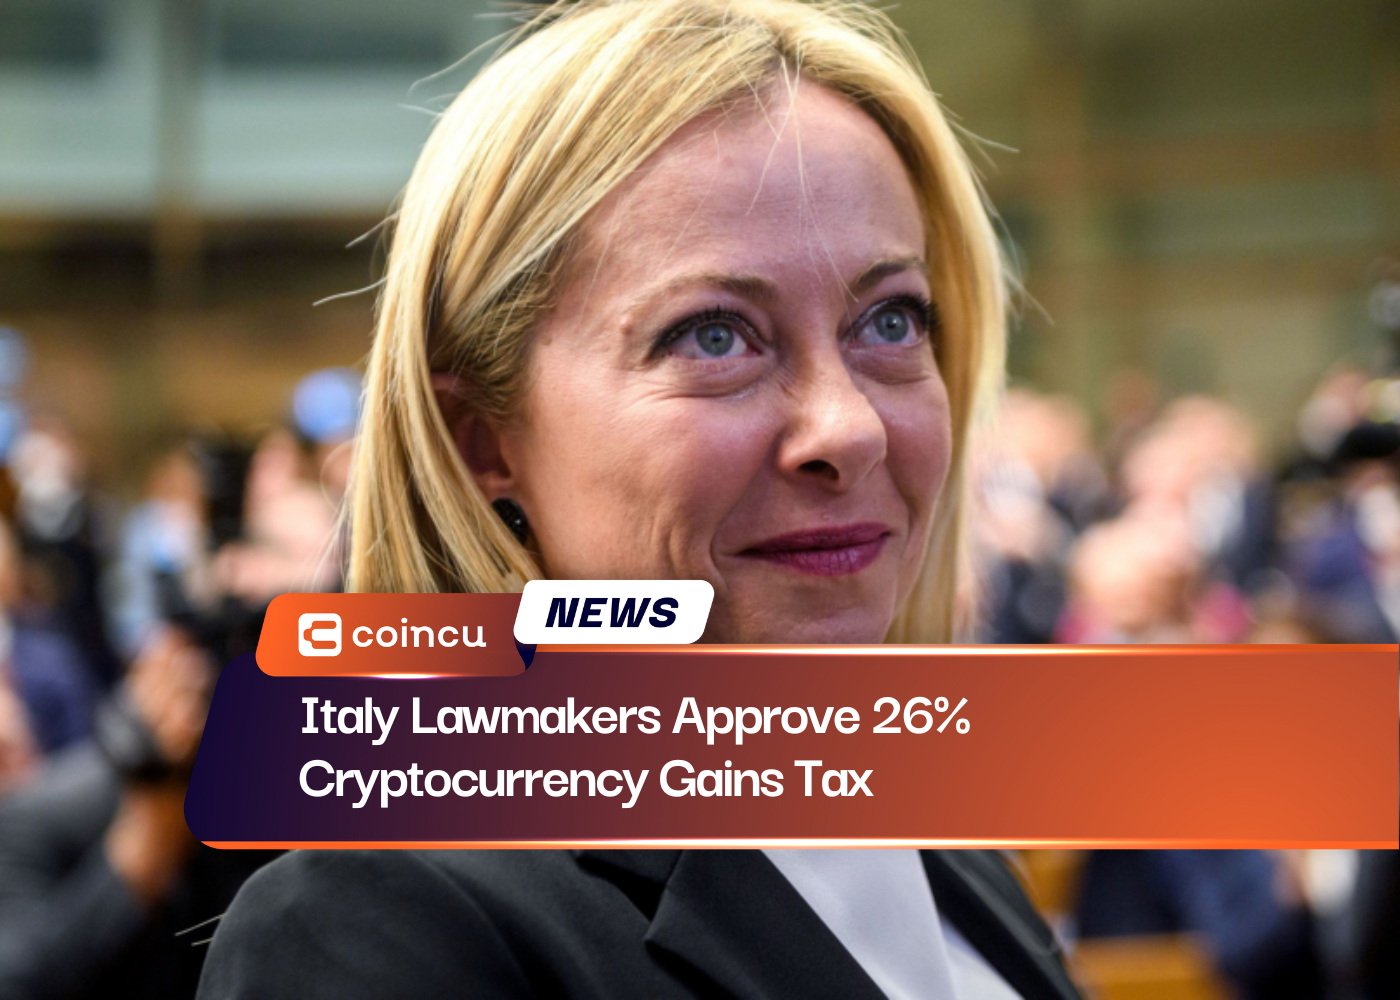 Italy Lawmakers Approve 26% Cryptocurrency Gains Tax